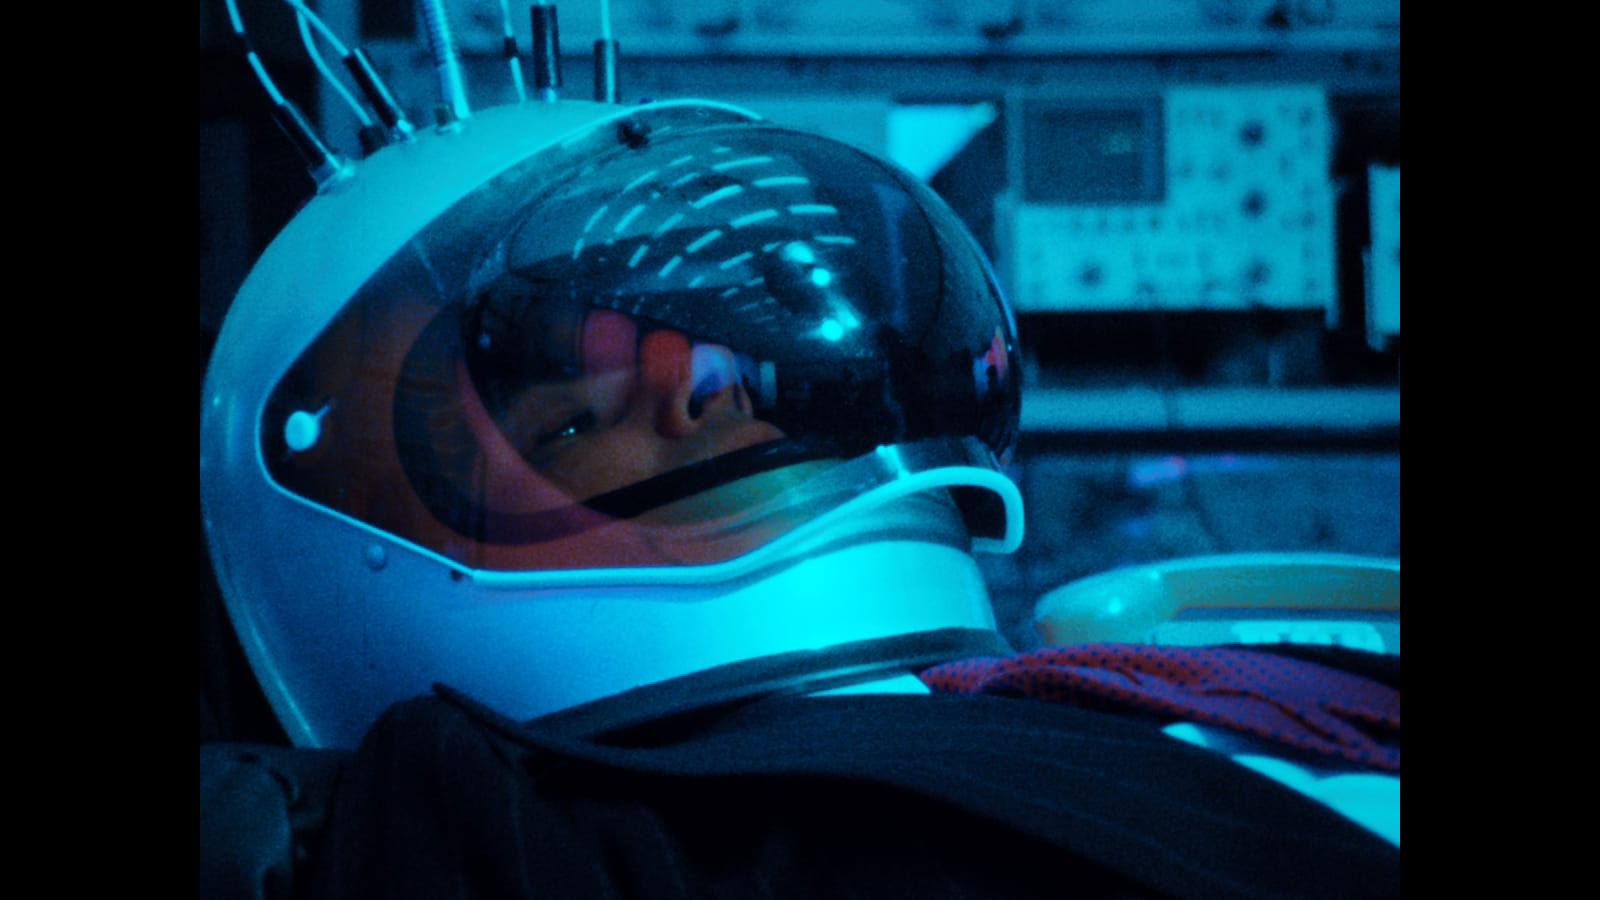 A man in a suit wearing an astronaut helmet reclined in room with various nobs and buttons washed in teal light. 